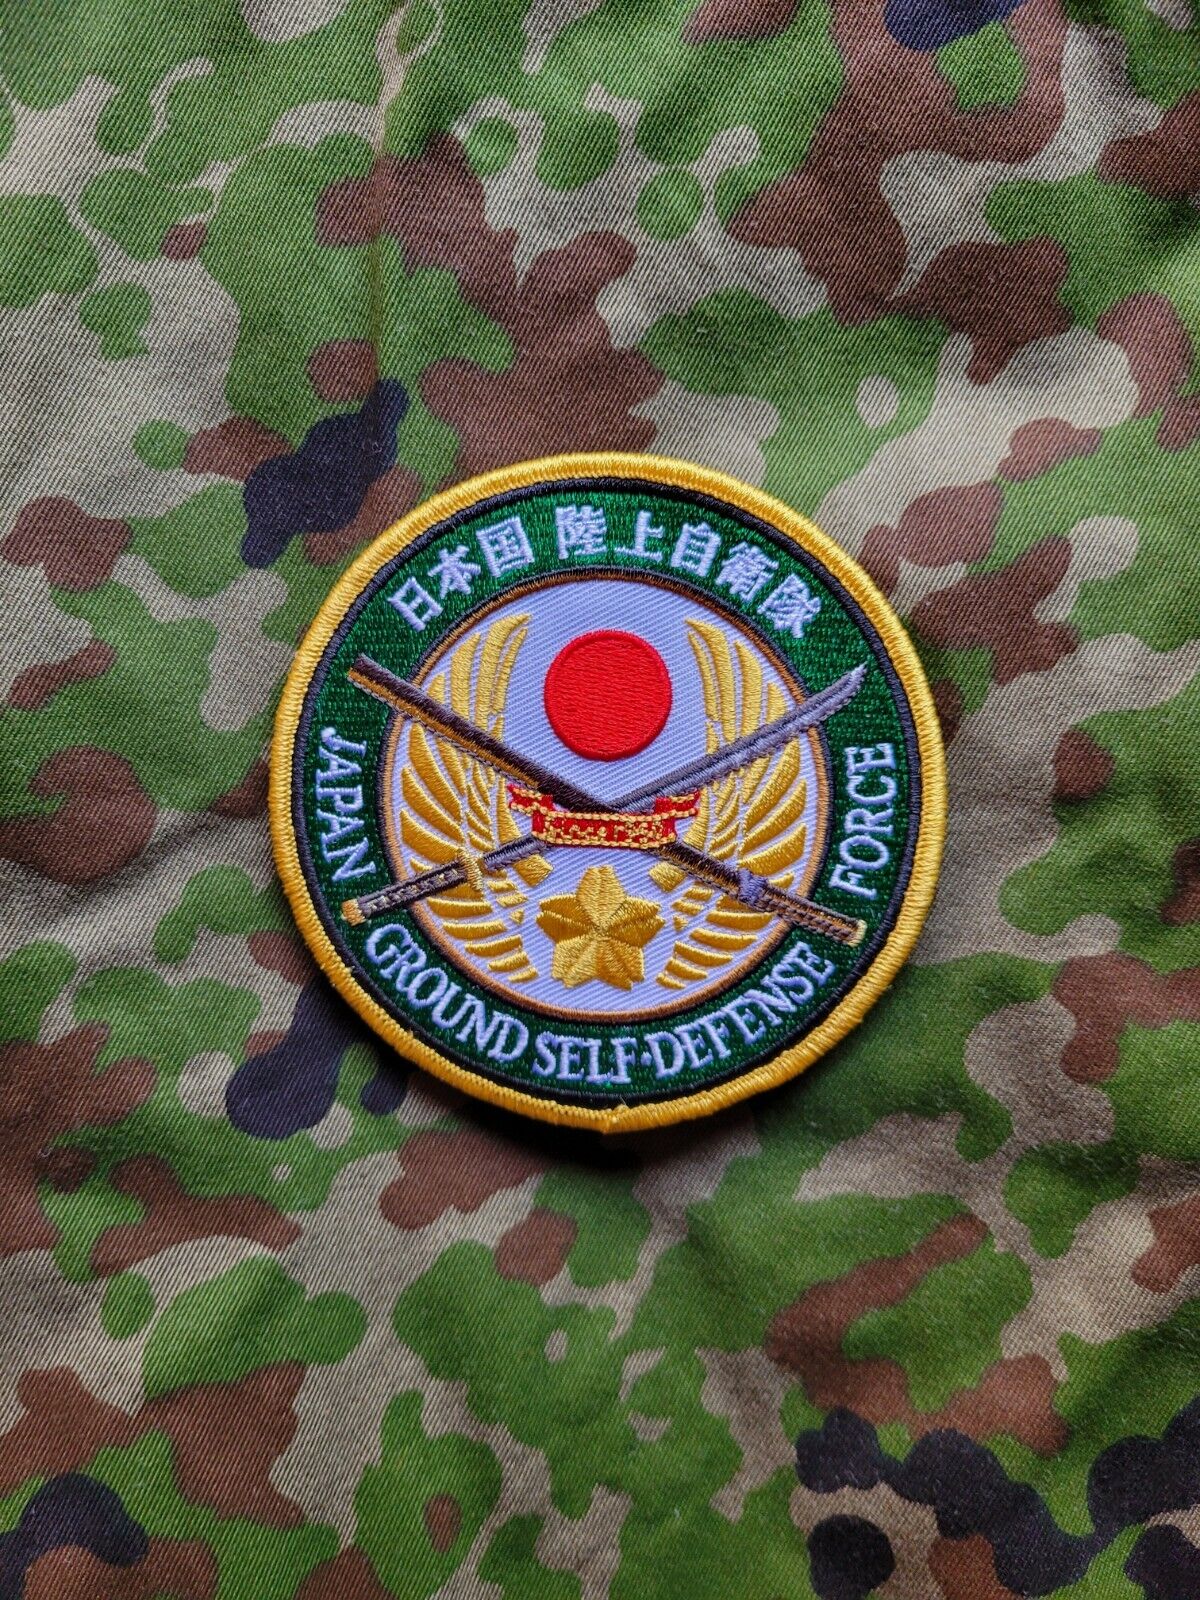 JSDF Japanese Self Defense Force army military morale airsoft milsim patch